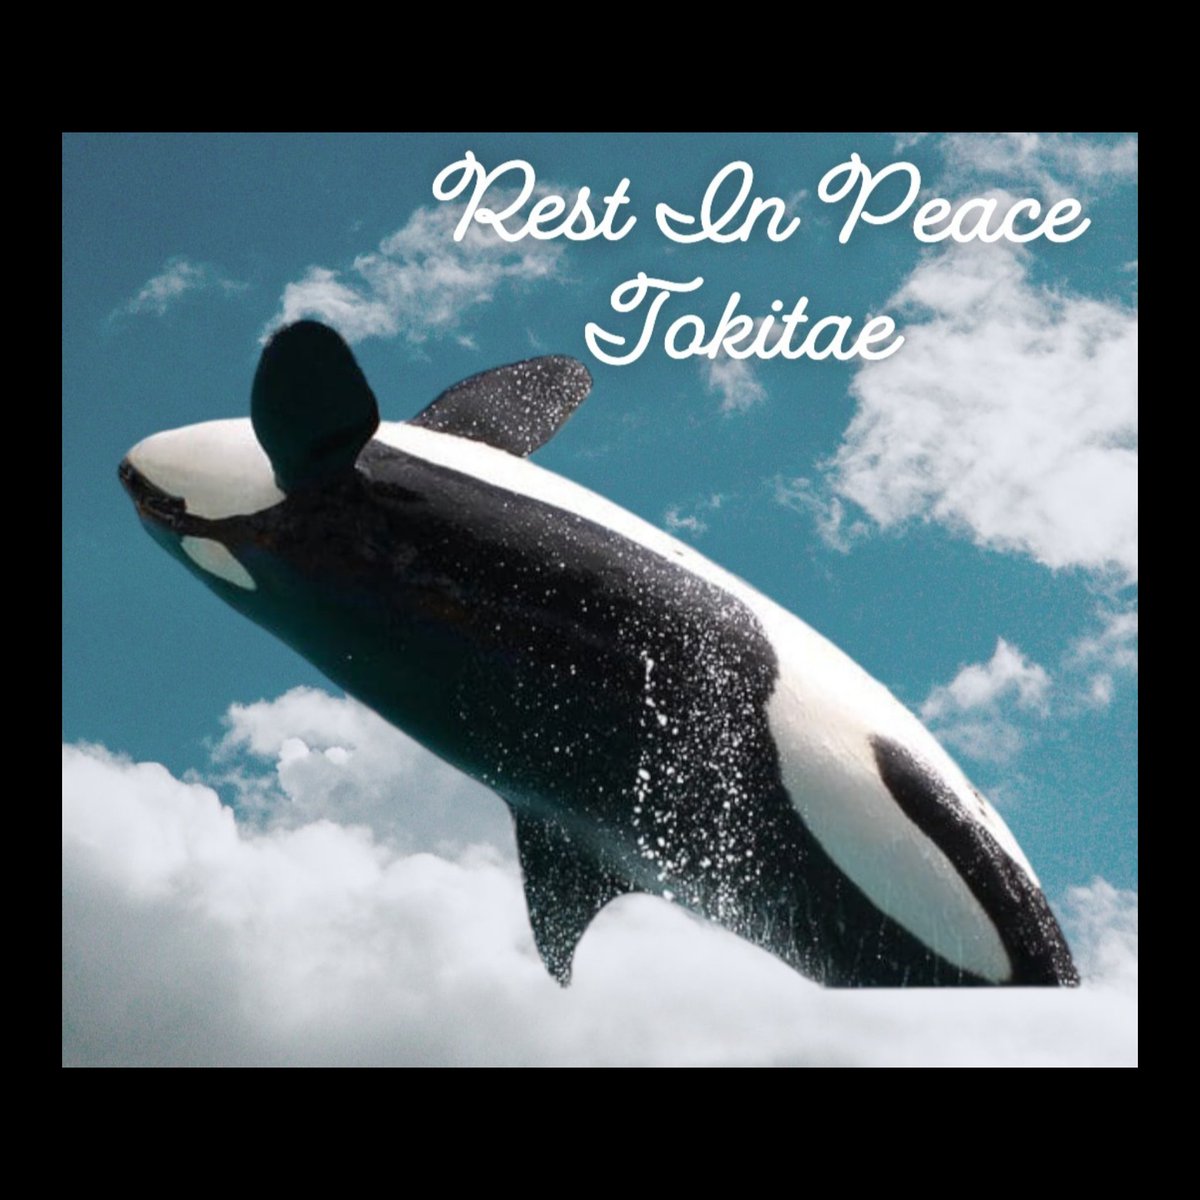 I never thought I would be making this post. Today we lost Tokitae/Lolita. Toki, you were loved by so many and you will always be in our hearts 💔 
#Tokitae #toki #Lolita #restinpeace #swimfree #killerwhale #orca